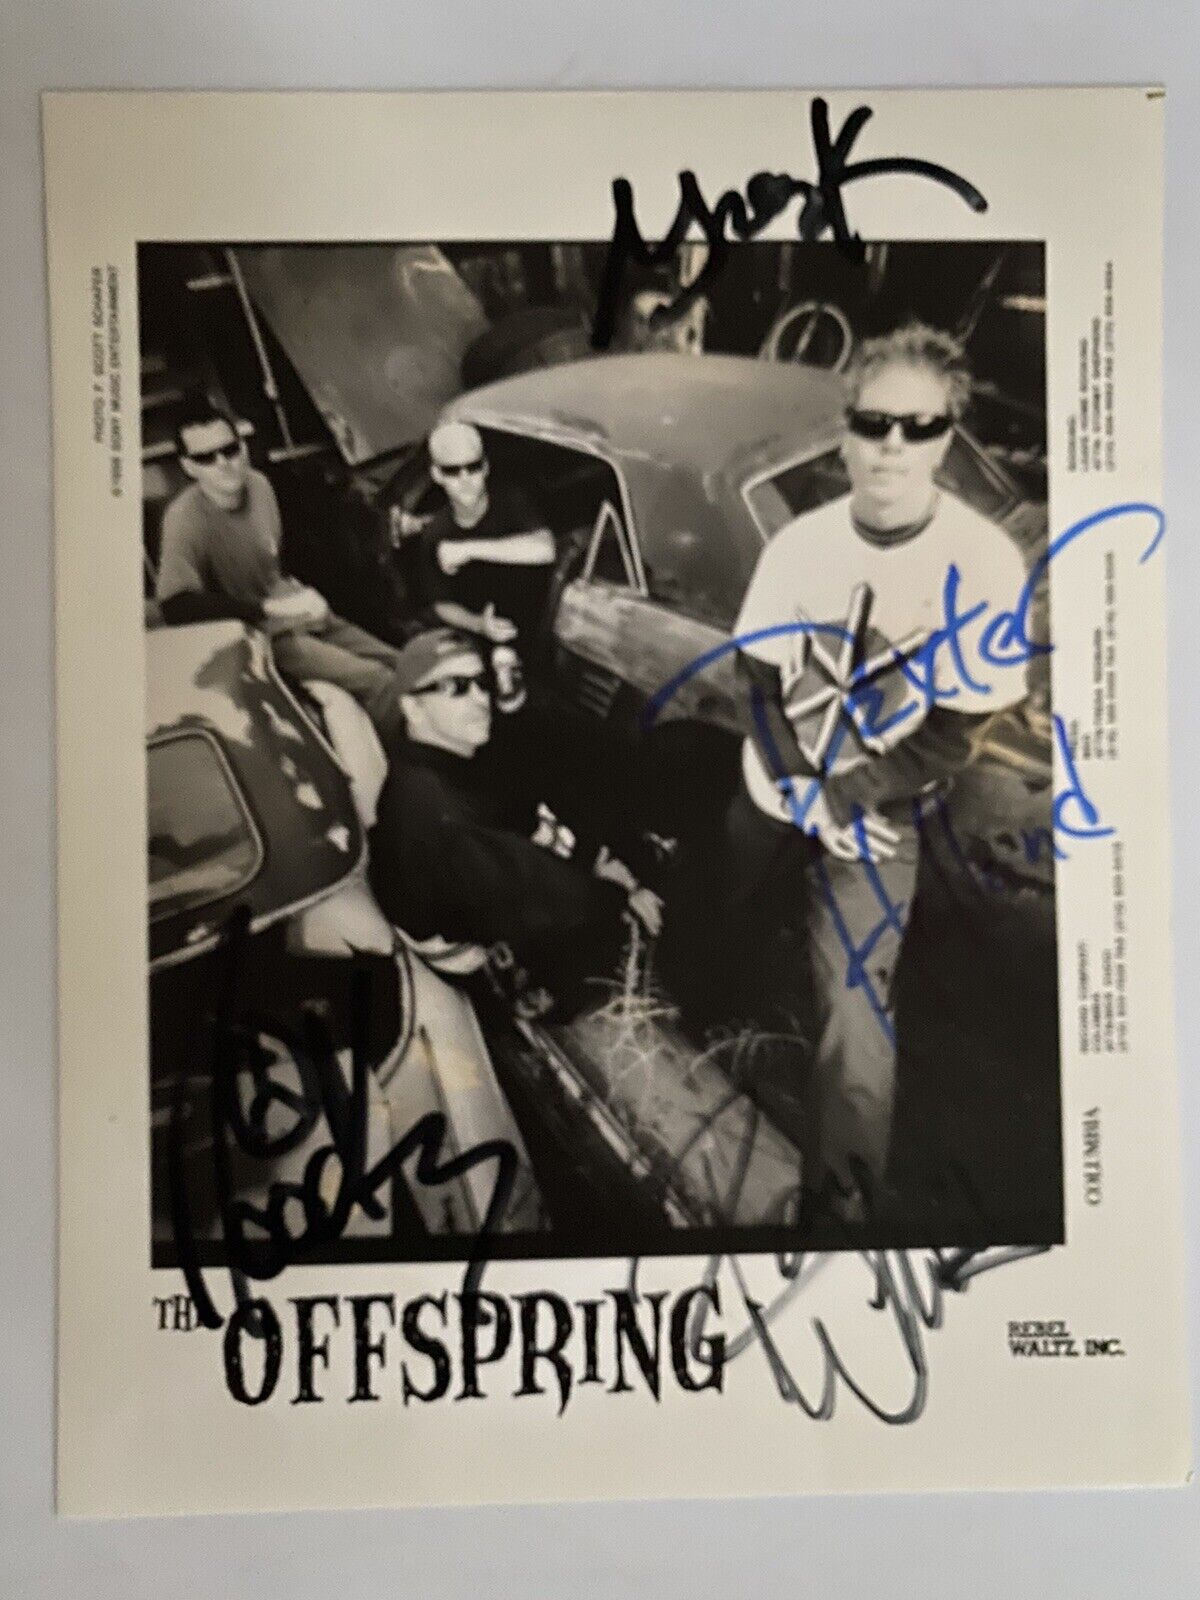 The Offspring Signed Press Promo Photo Signed By 4 Members